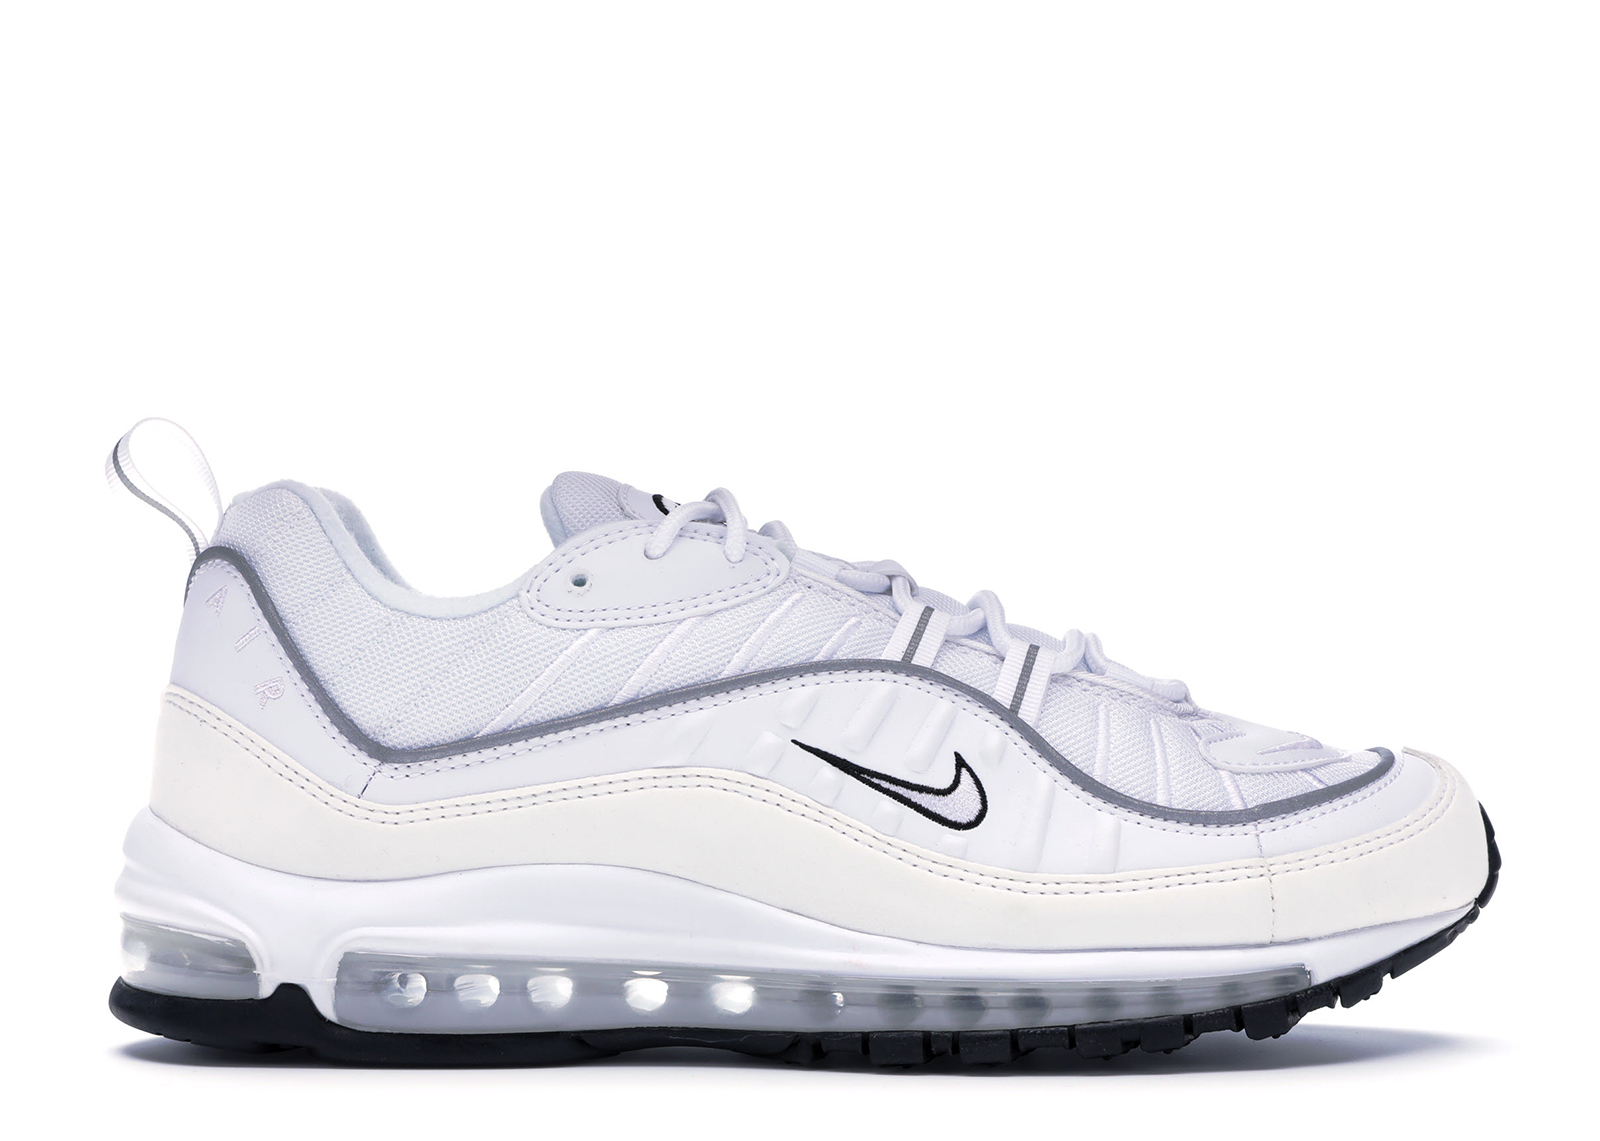 Buy Nike Air Max 98 Shoes & New Sneakers - StockX